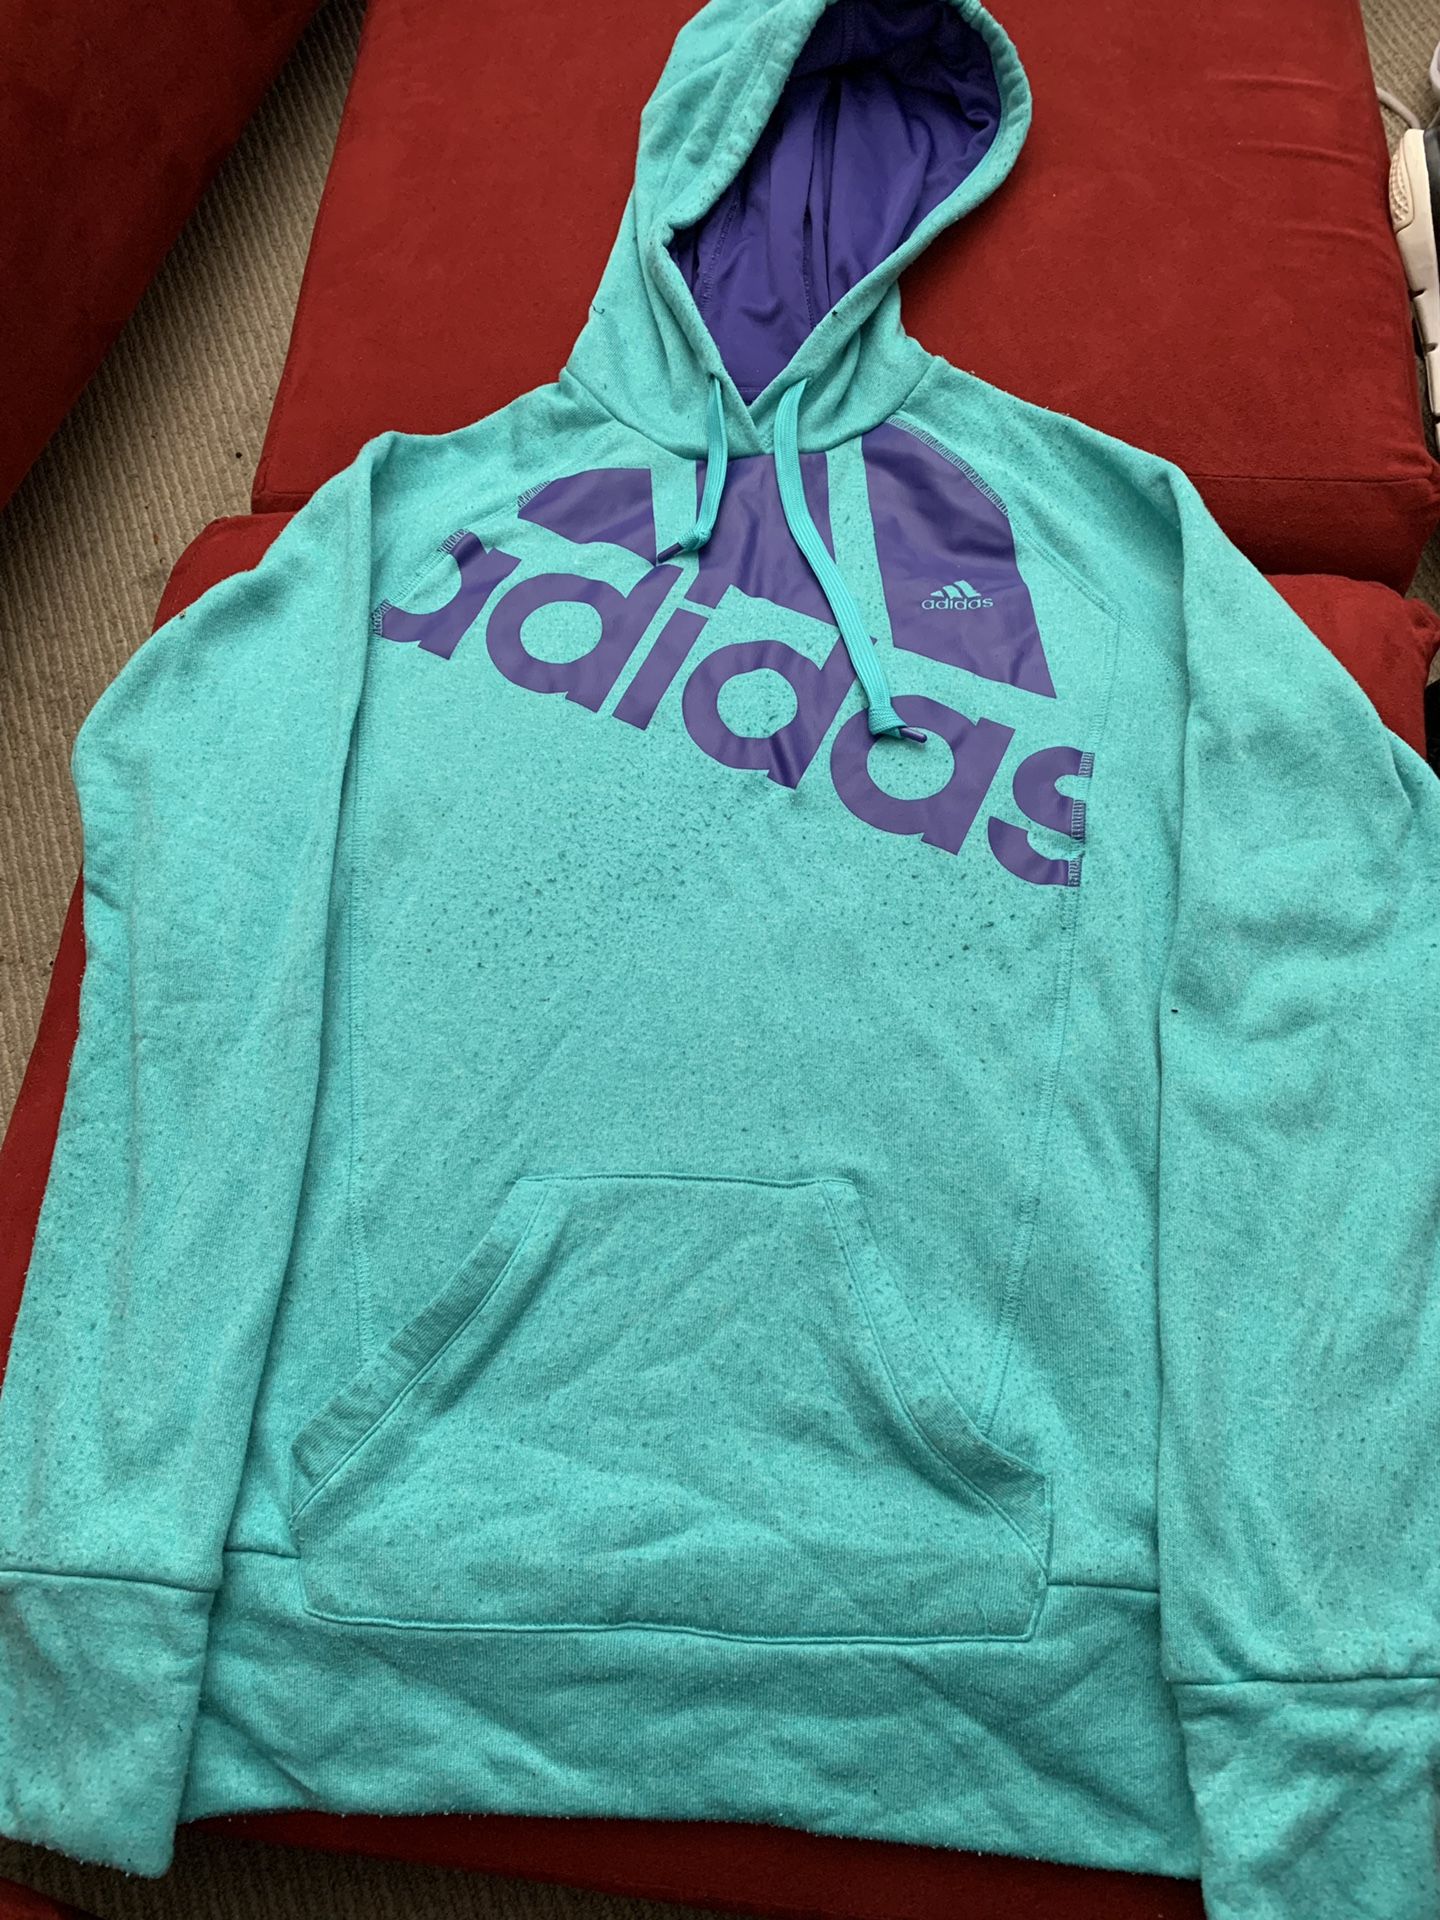 Adidas hoodie.....for performance